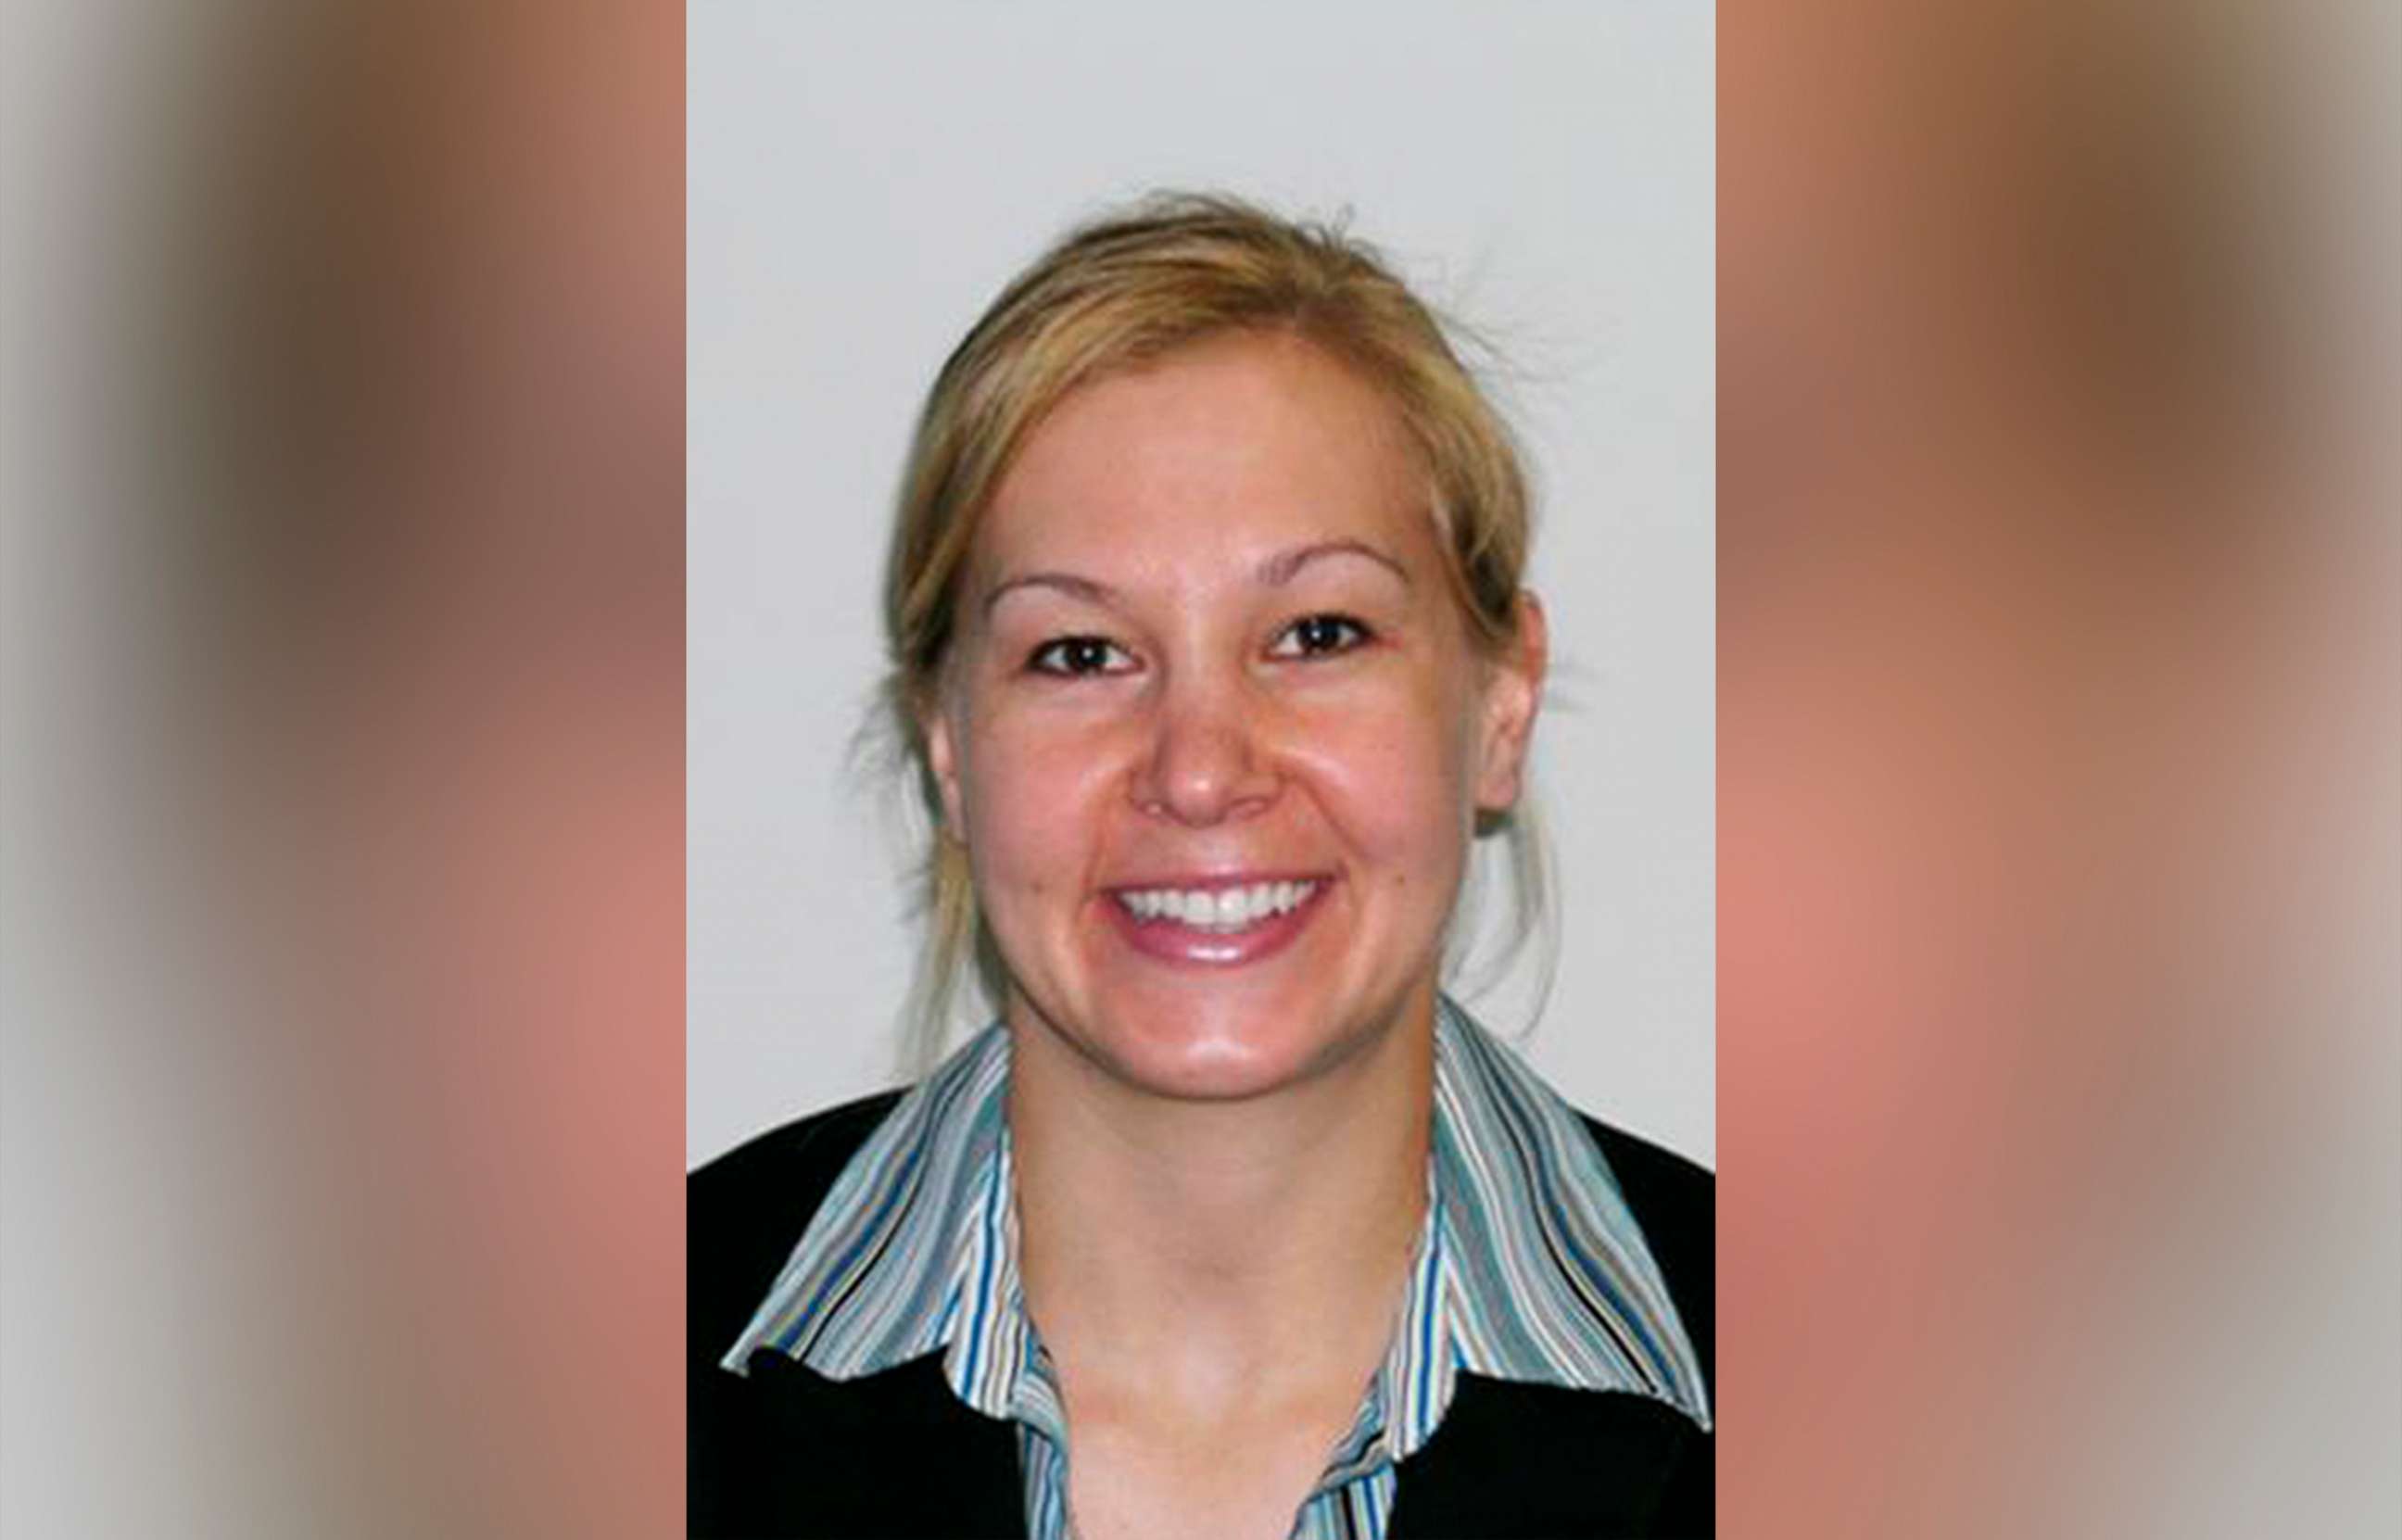 PHOTO: An undated photo provided by the FBI shows agent Laura Schwartzenberger who was fatally shot, Feb. 2, 2021.